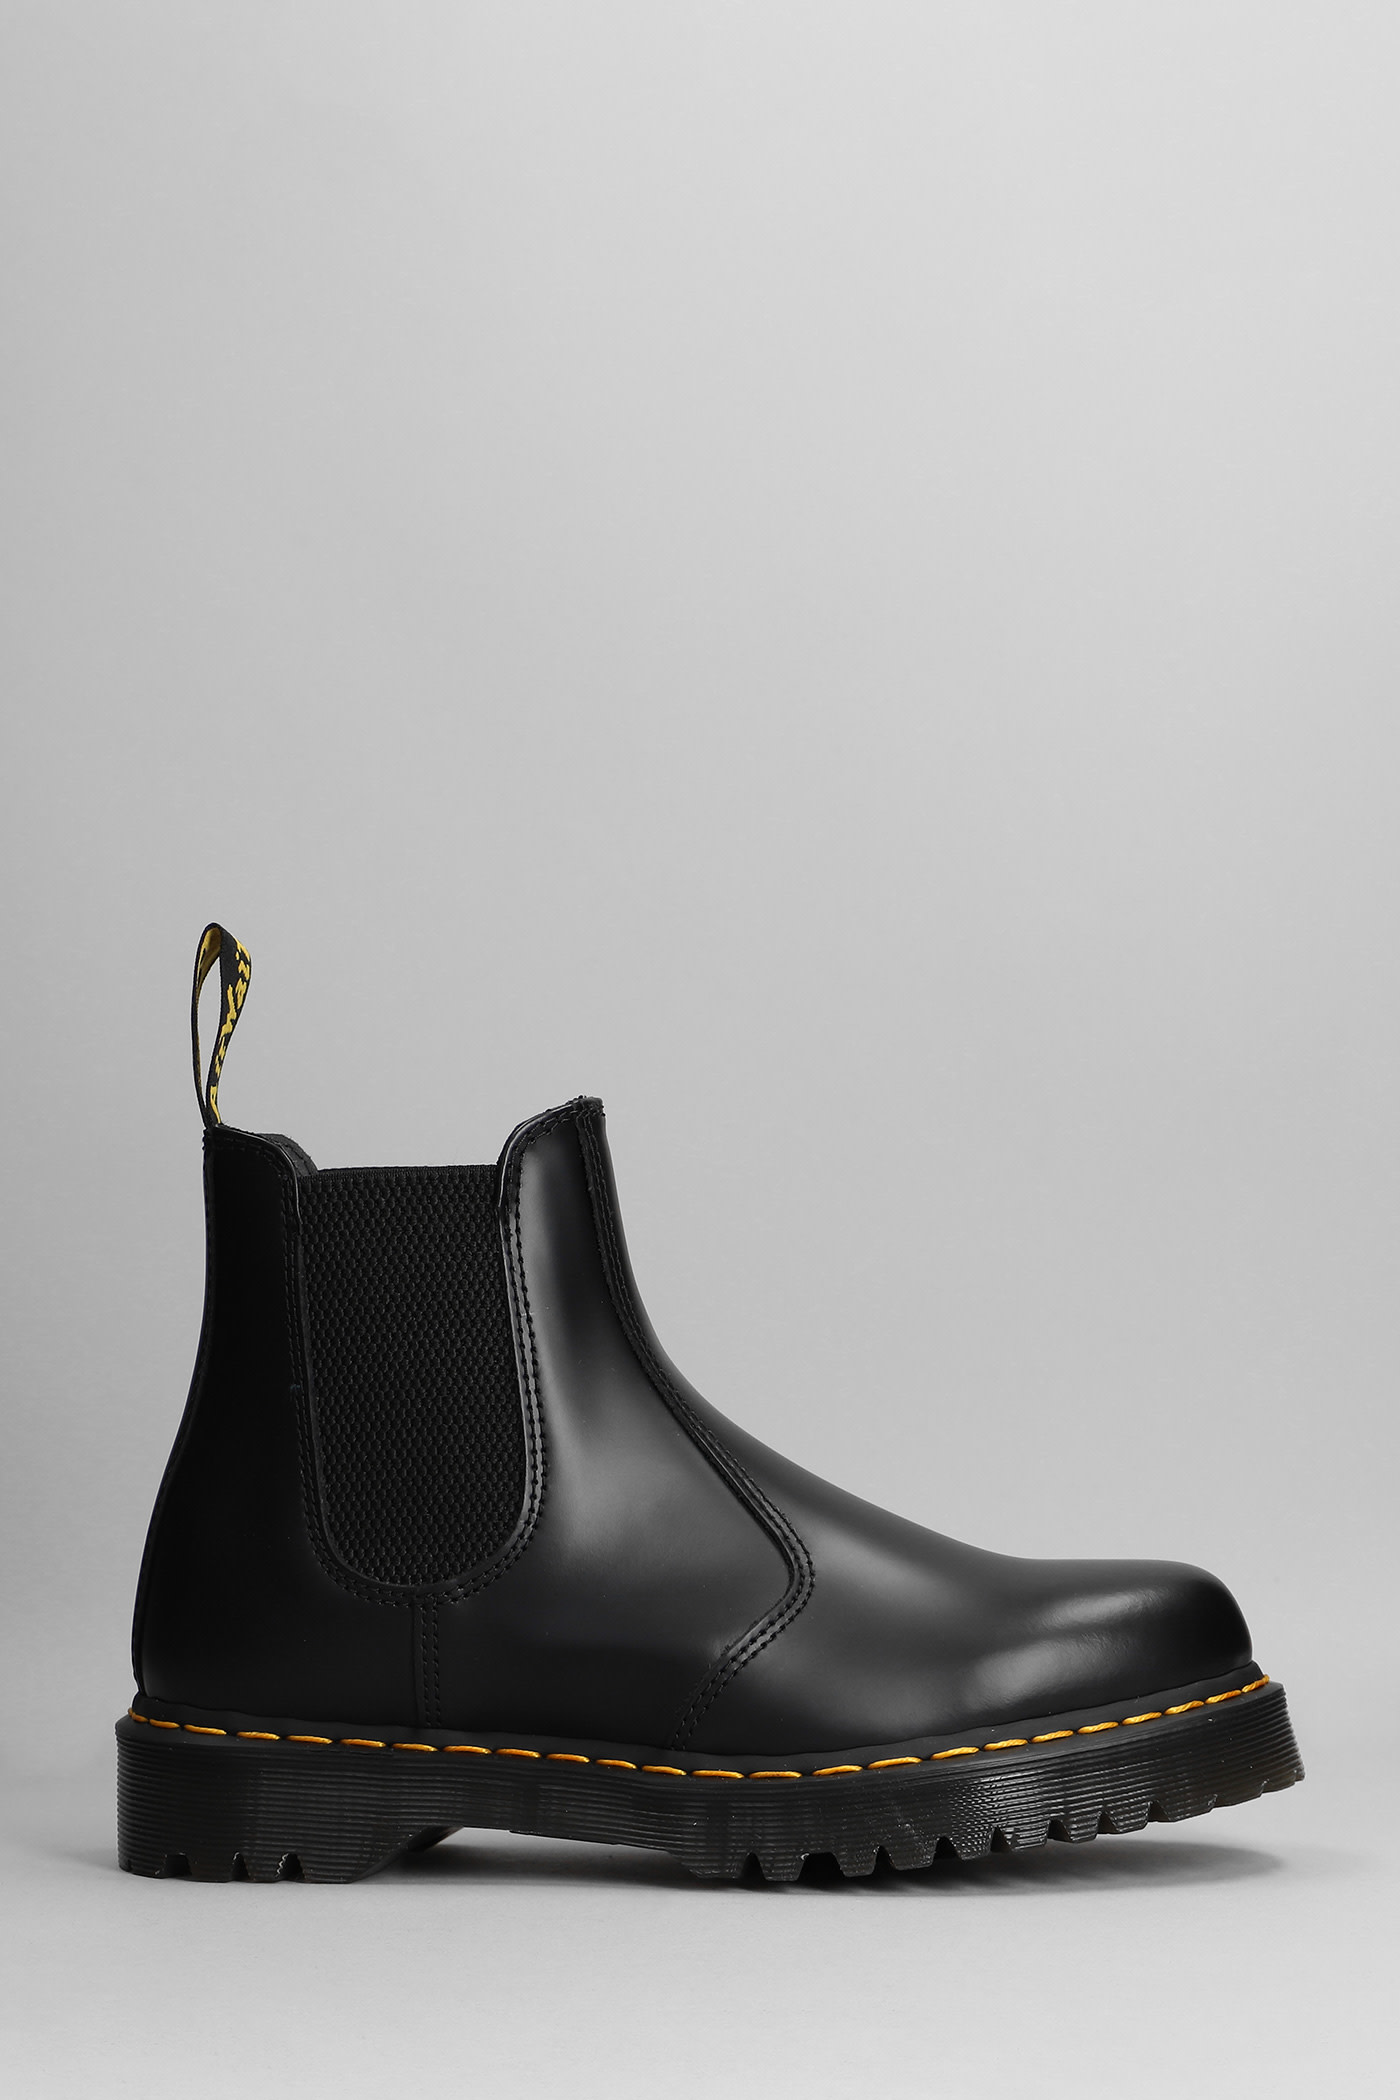 DR. MARTENS' 2976 BEX COMBAT BOOTS IN BLACK LEATHER